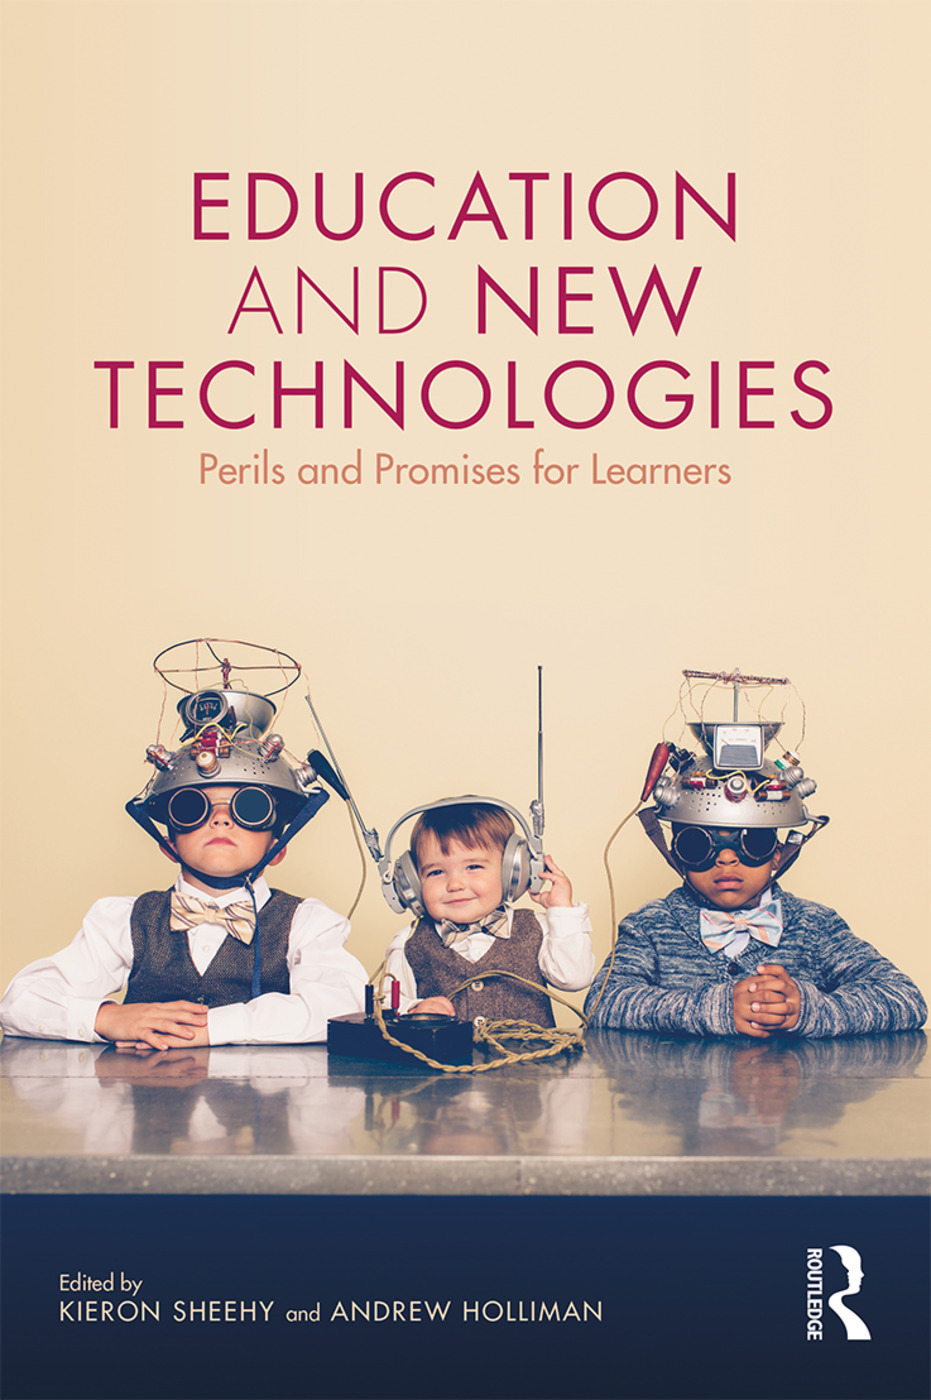 Education and new technologies : perils and promises for learners